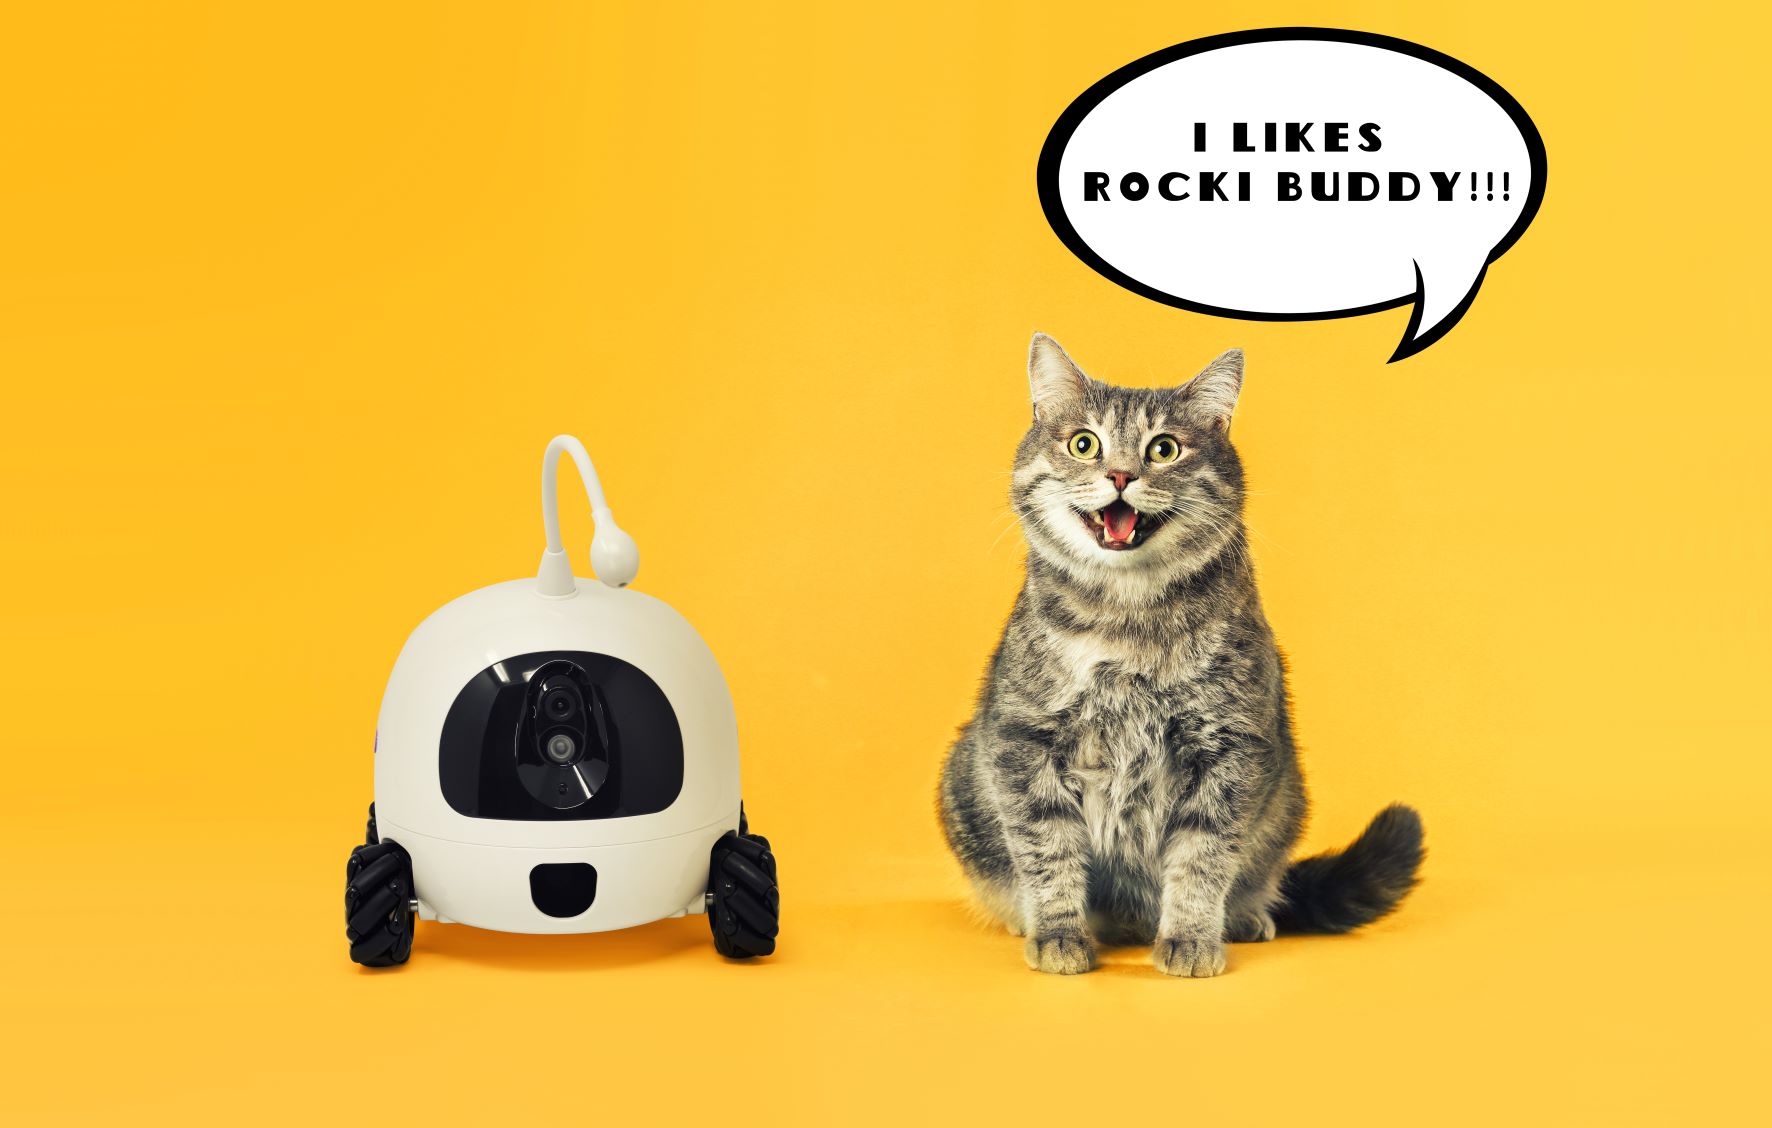 Intelligent Robot Cat for Various Smart Uses 